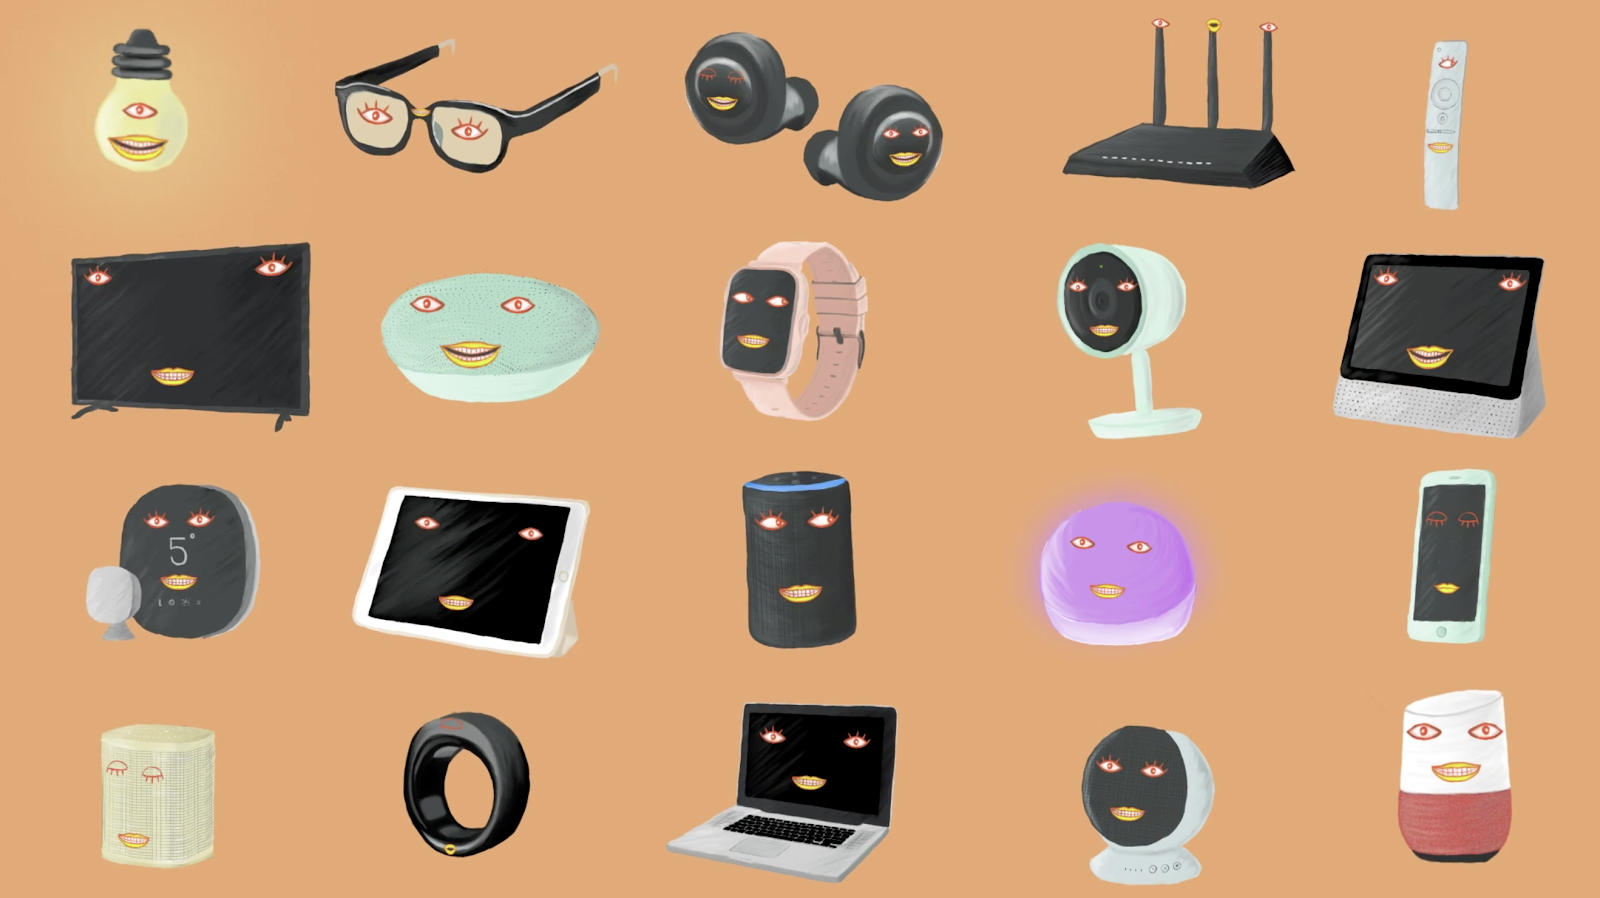 A still from Roberta Leoni's animation on hidden gender biases in voice tech shows a range of voice assistant devices with feminine personifcations.